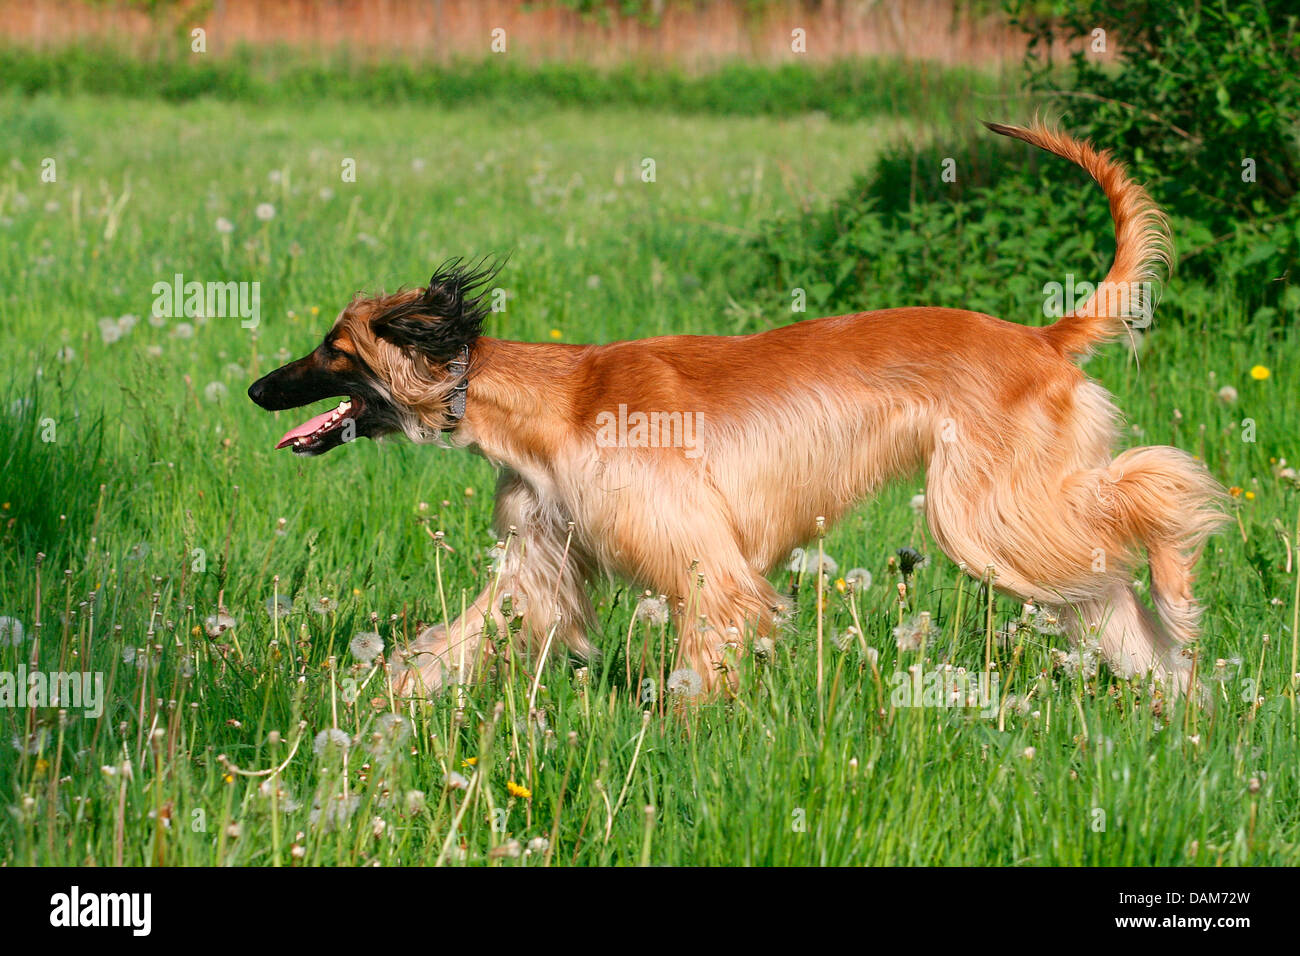 Afghanistan Hound, Afghan Hound (Canis lupus f. familiaris), running in a meadow, Germany Stock Photo